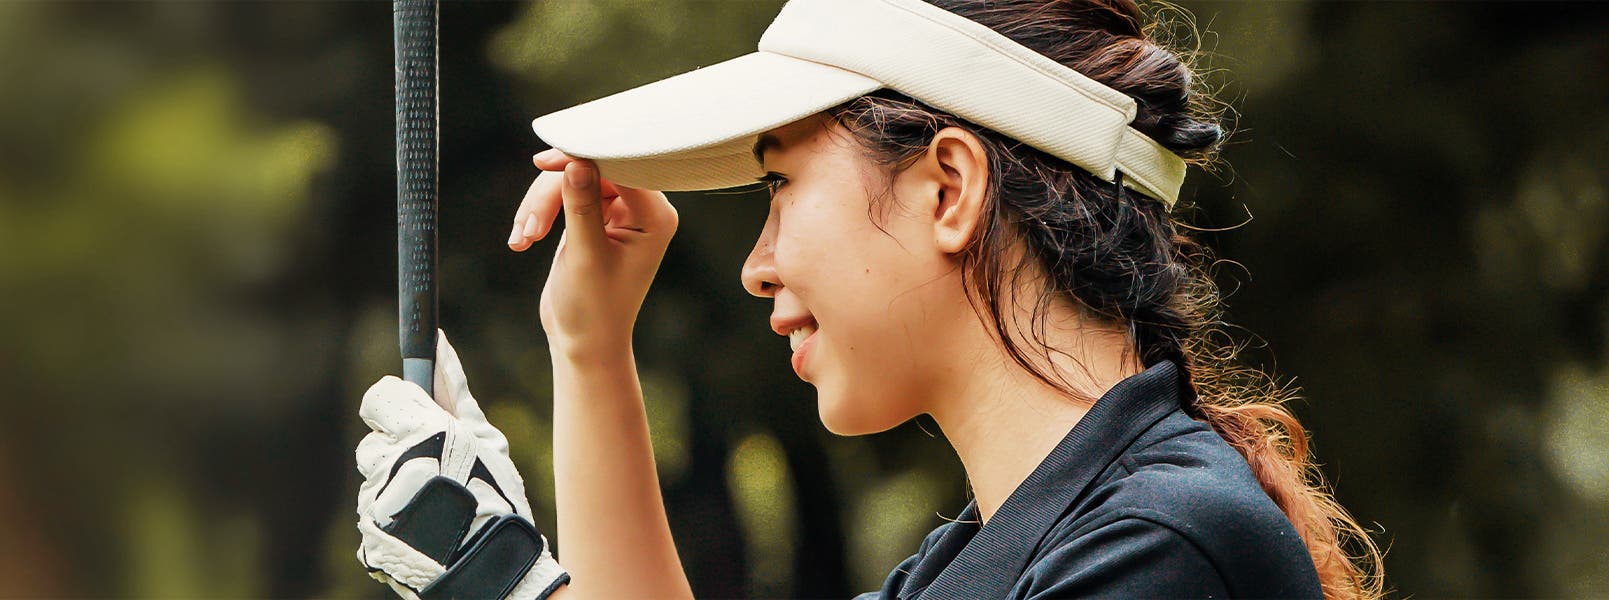 Closeup of a woman golfer holding her club wearing a golf glove and visor.